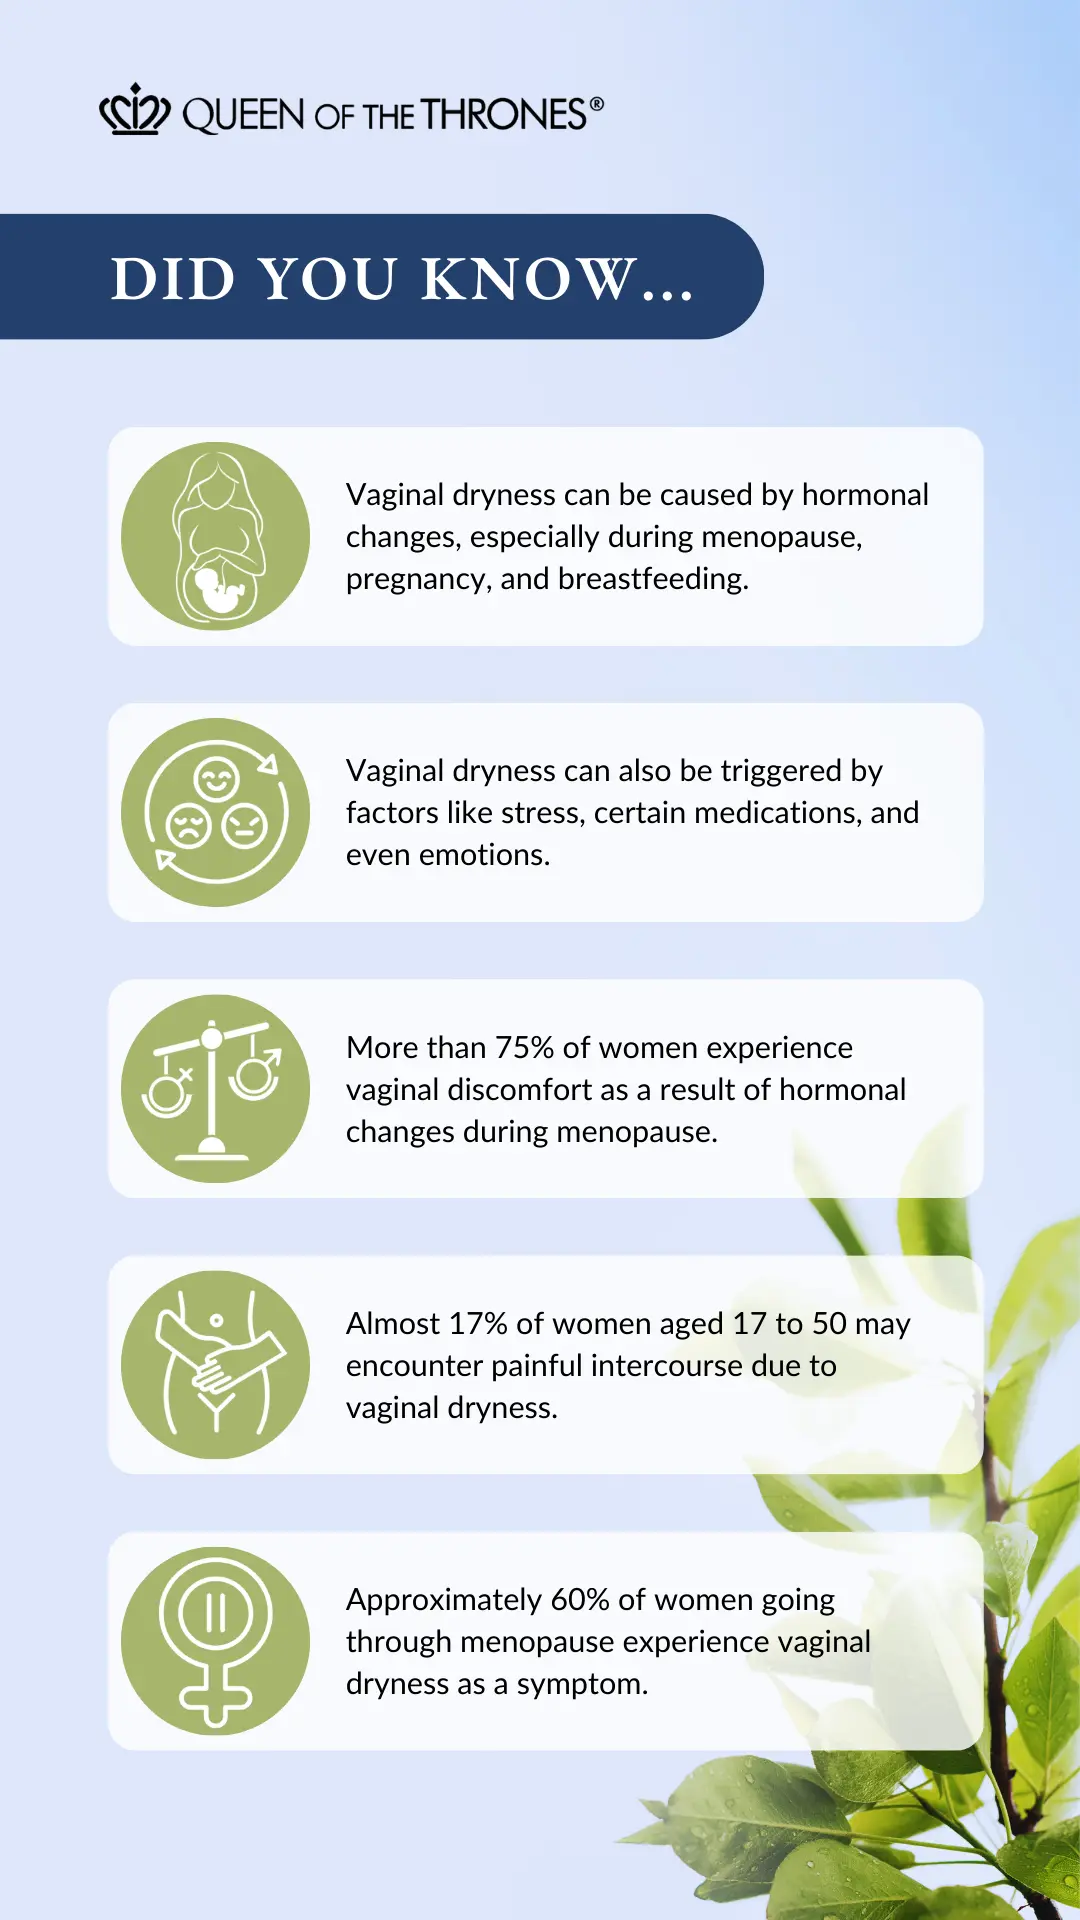 What you need to know about vaginal dryness by Queen of the Thrones